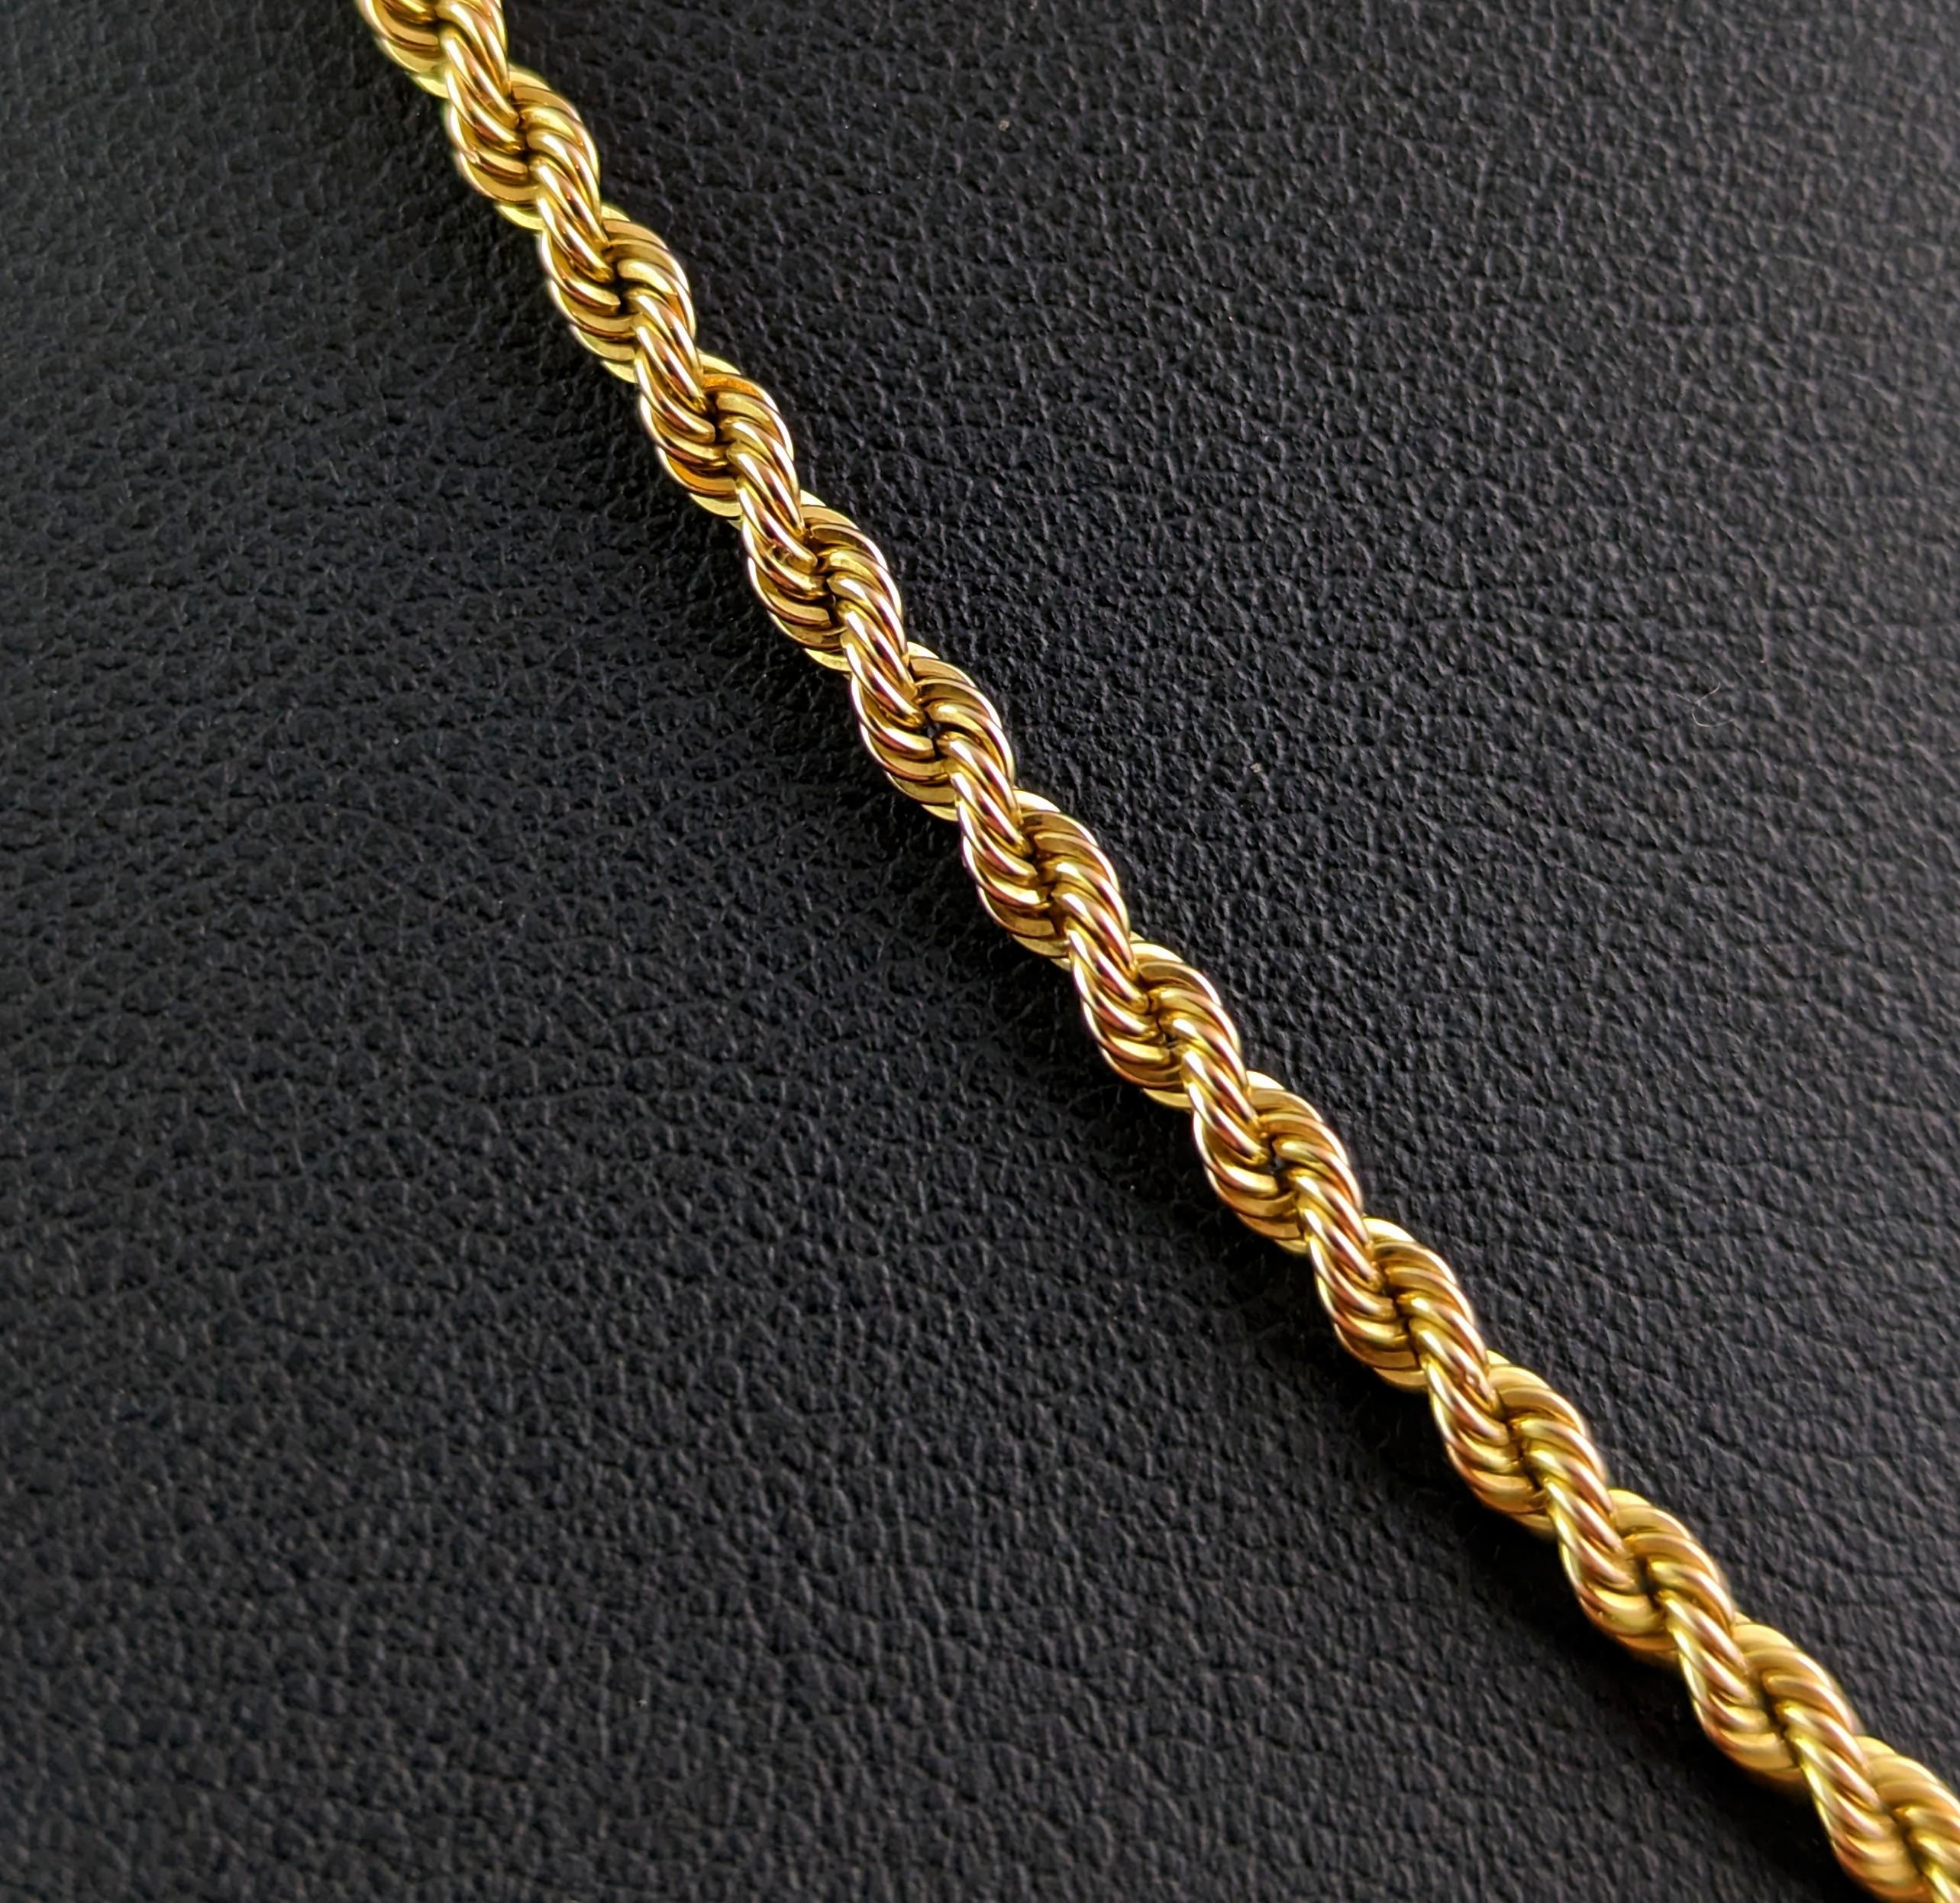 Vintage 9k yellow gold rope twist link chain necklace 1